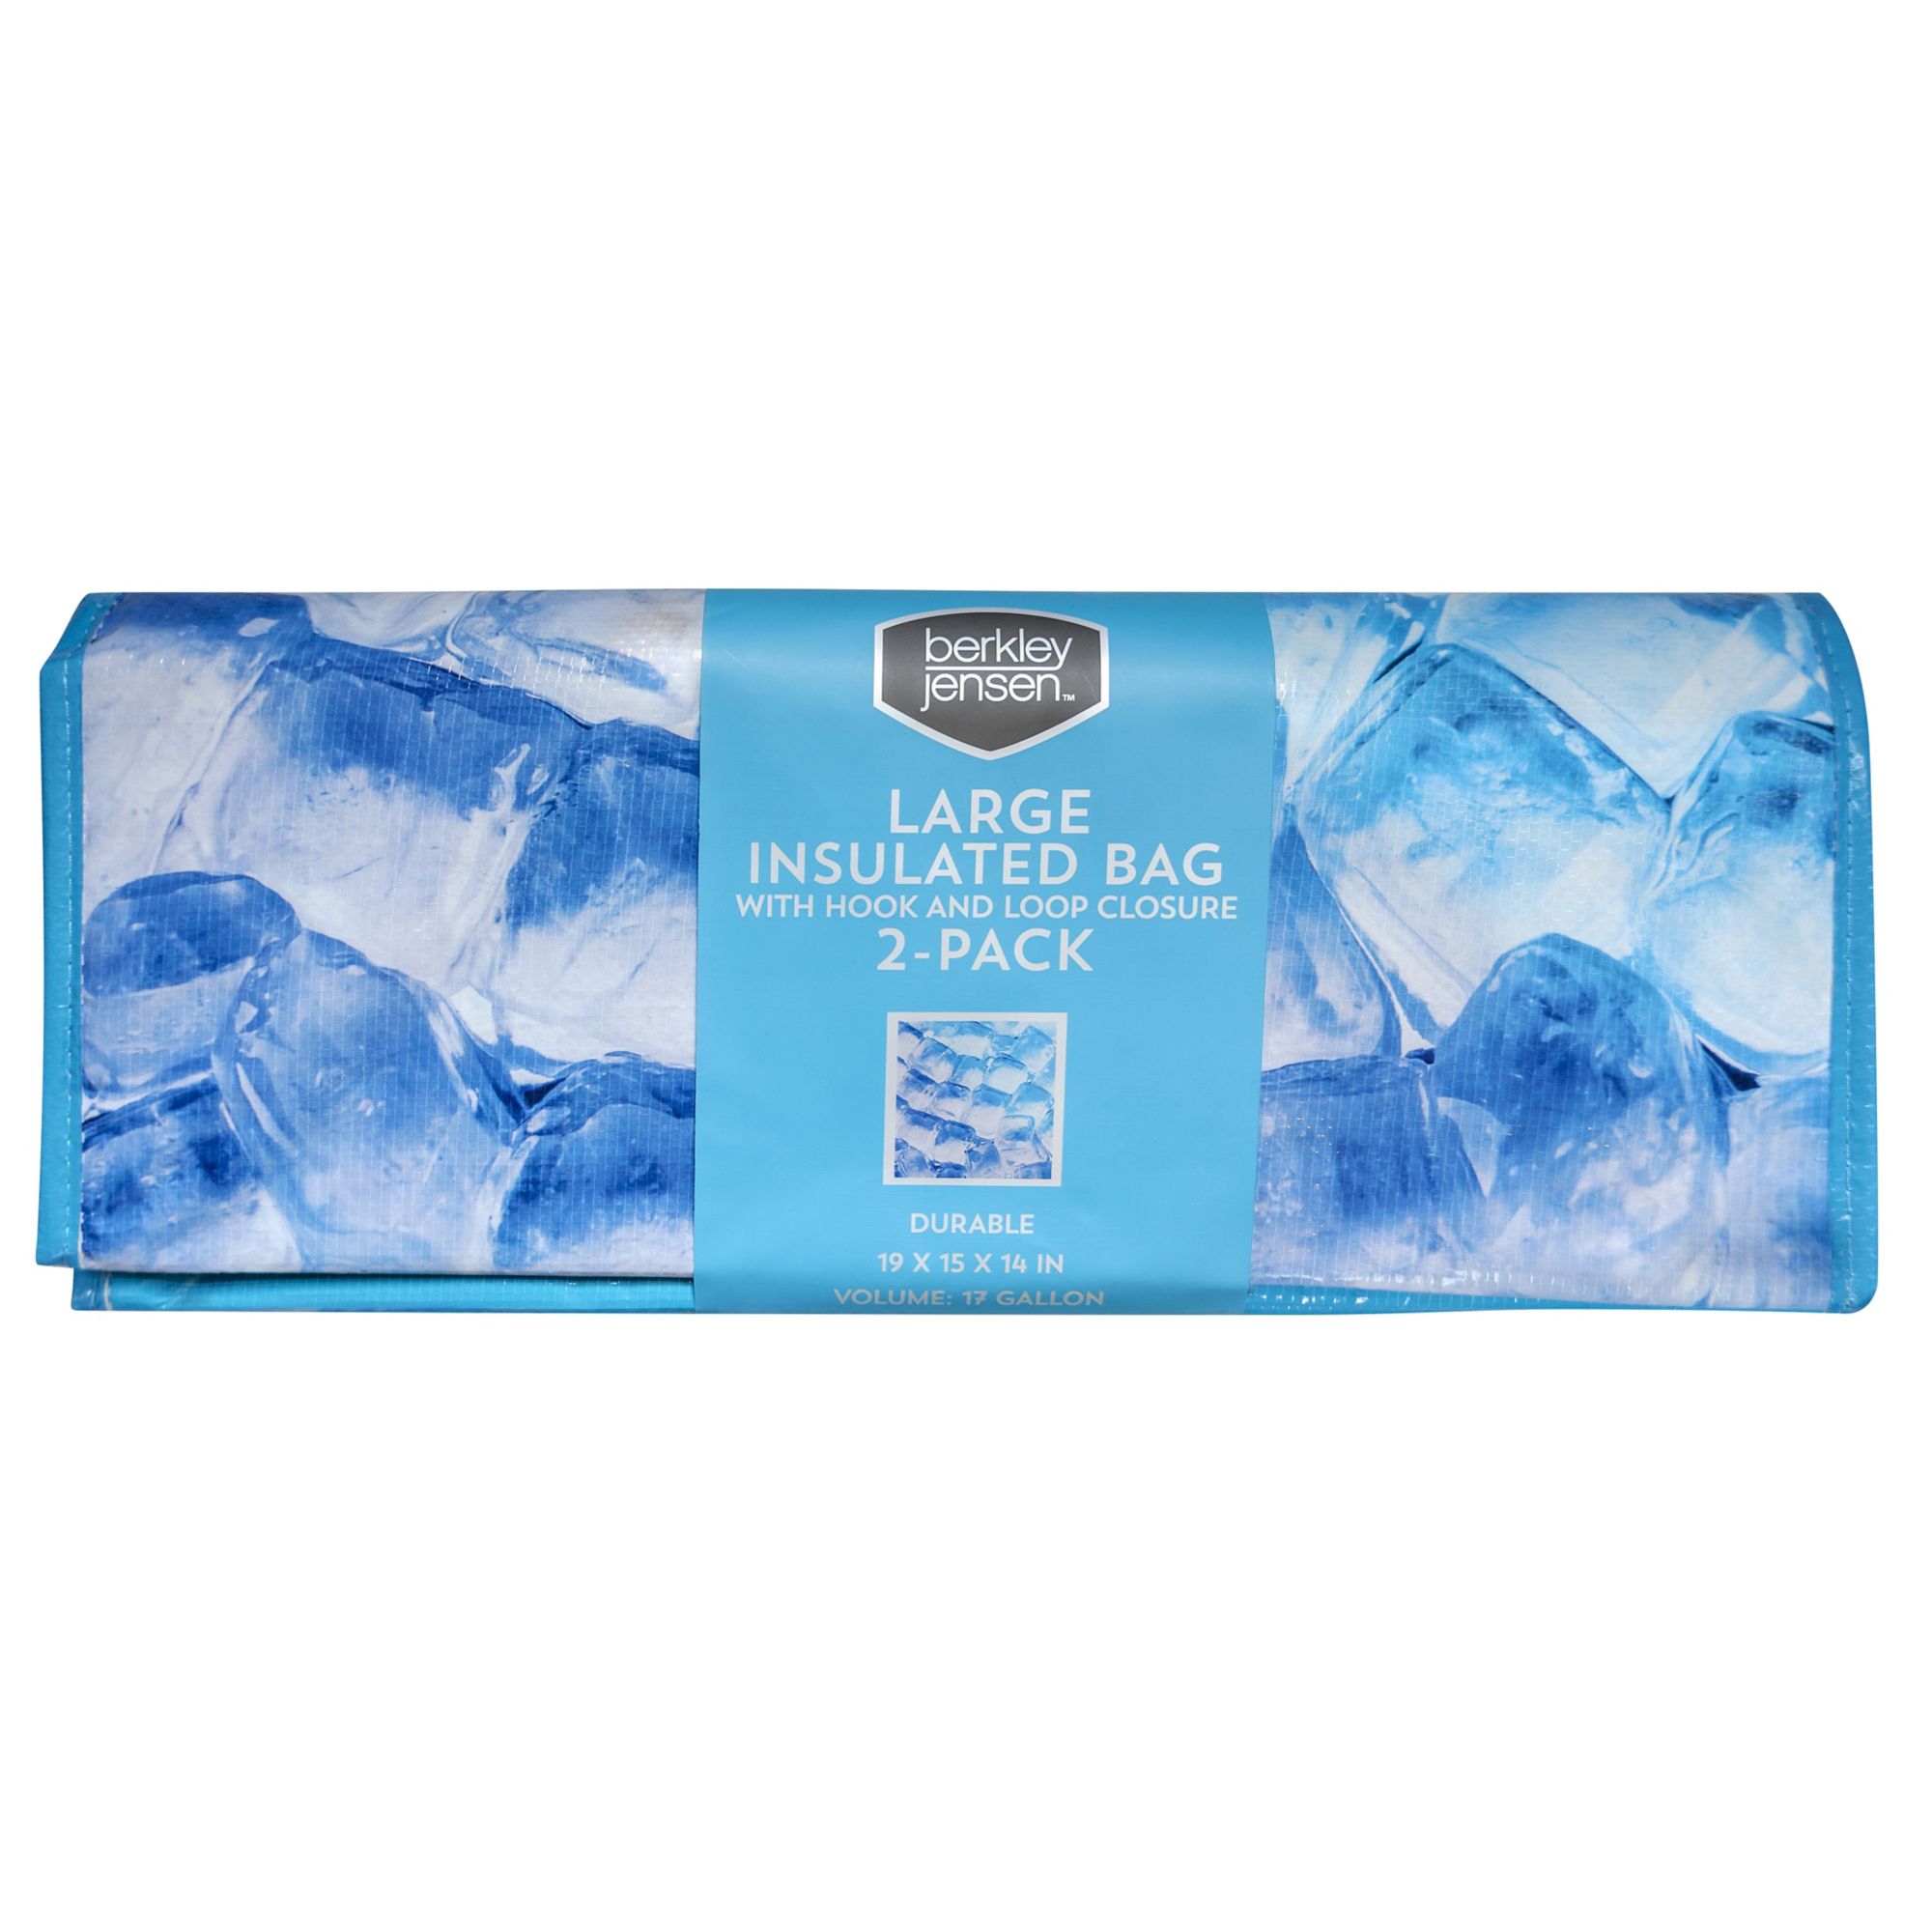 Rubbermaid Easy Release Ice Cube Trays - Select Color (2 Pack) Made in The USA - Baby Blue